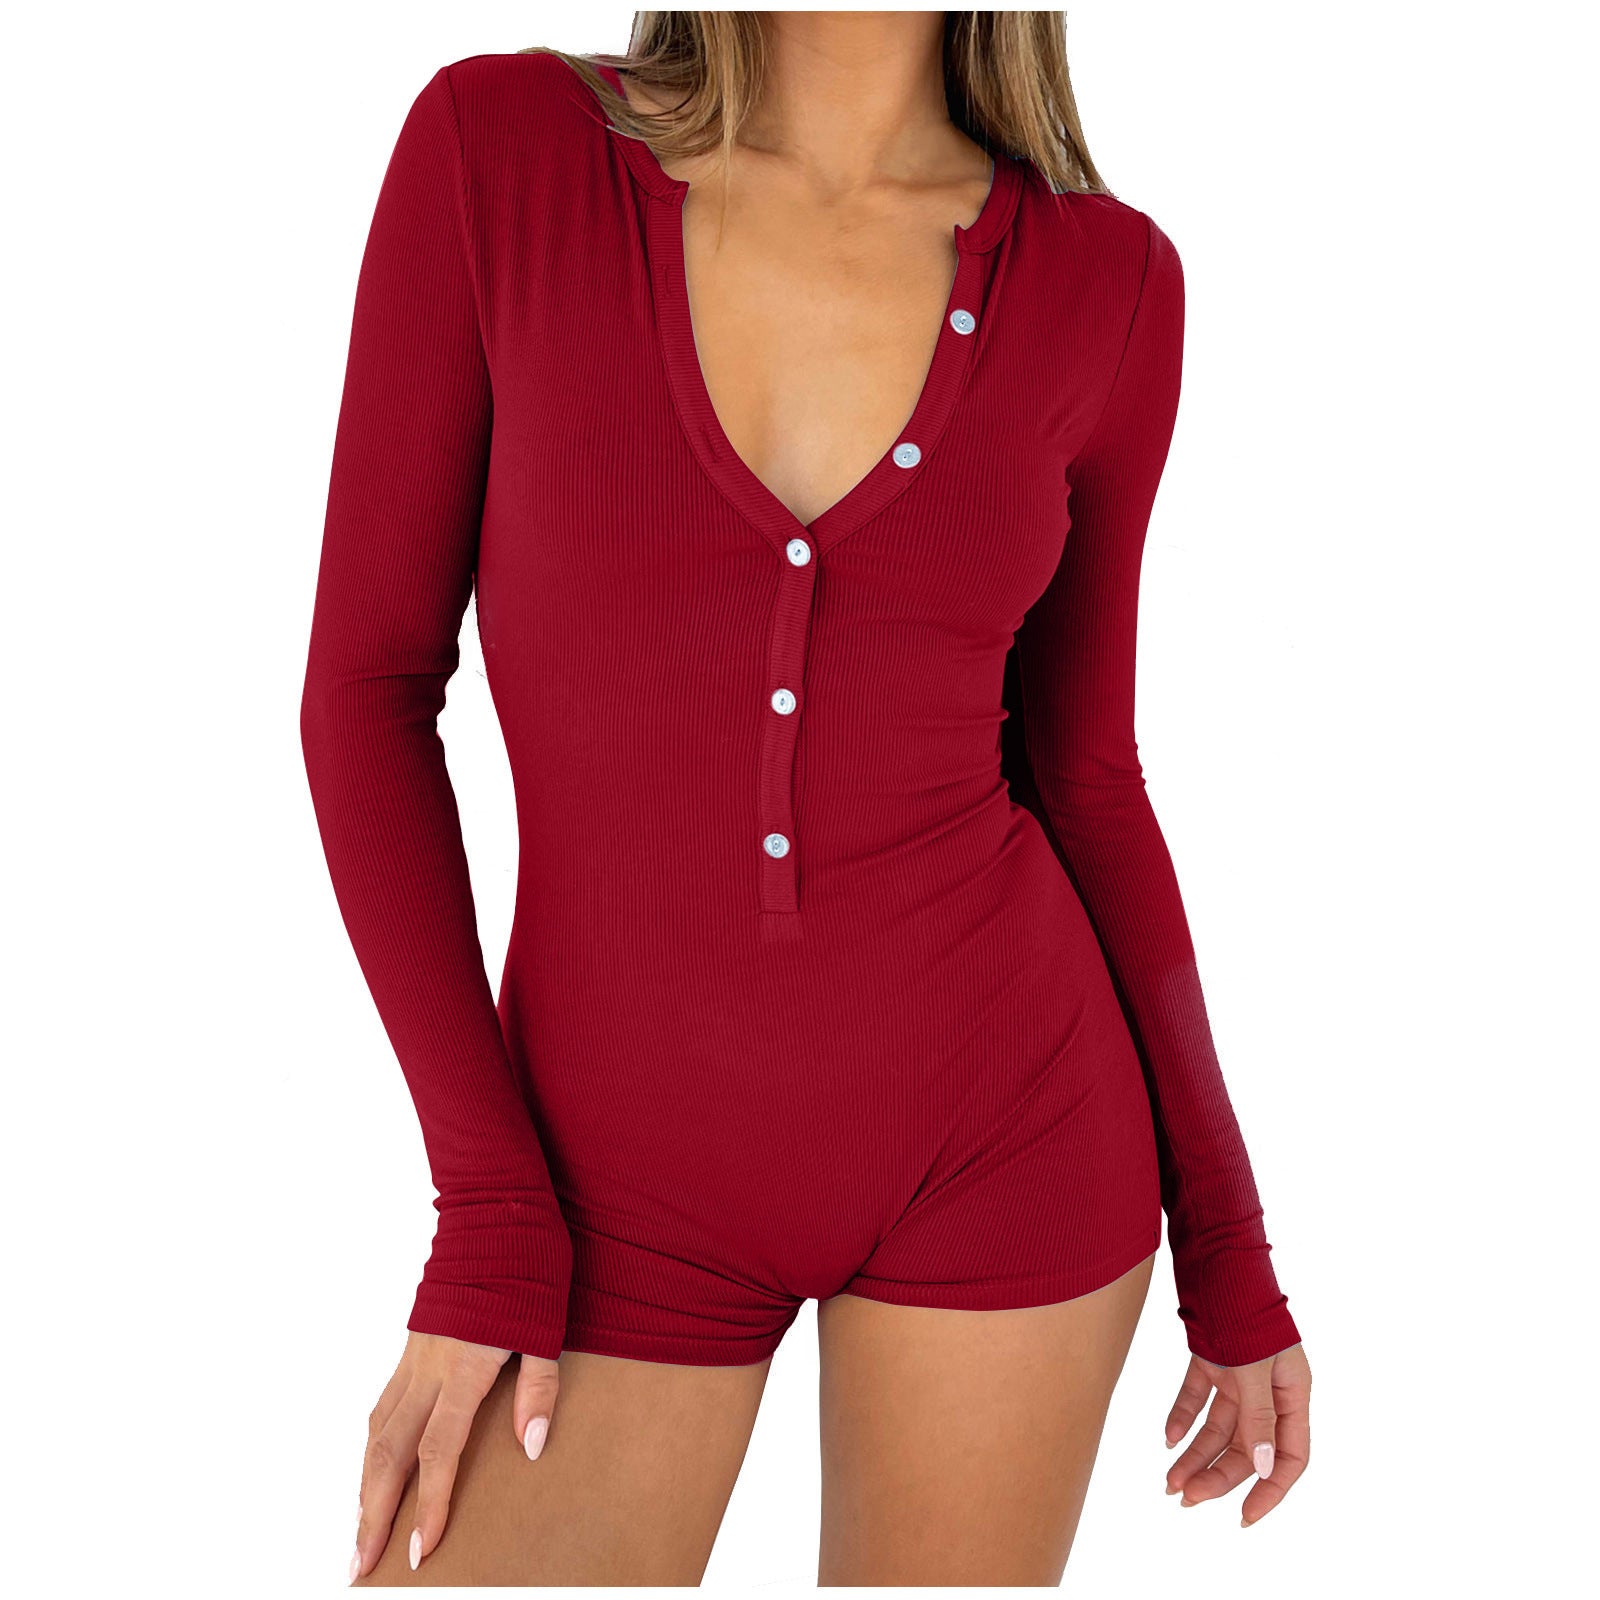 Women's Large Front Chest Button Half Sexy Jumpsuits